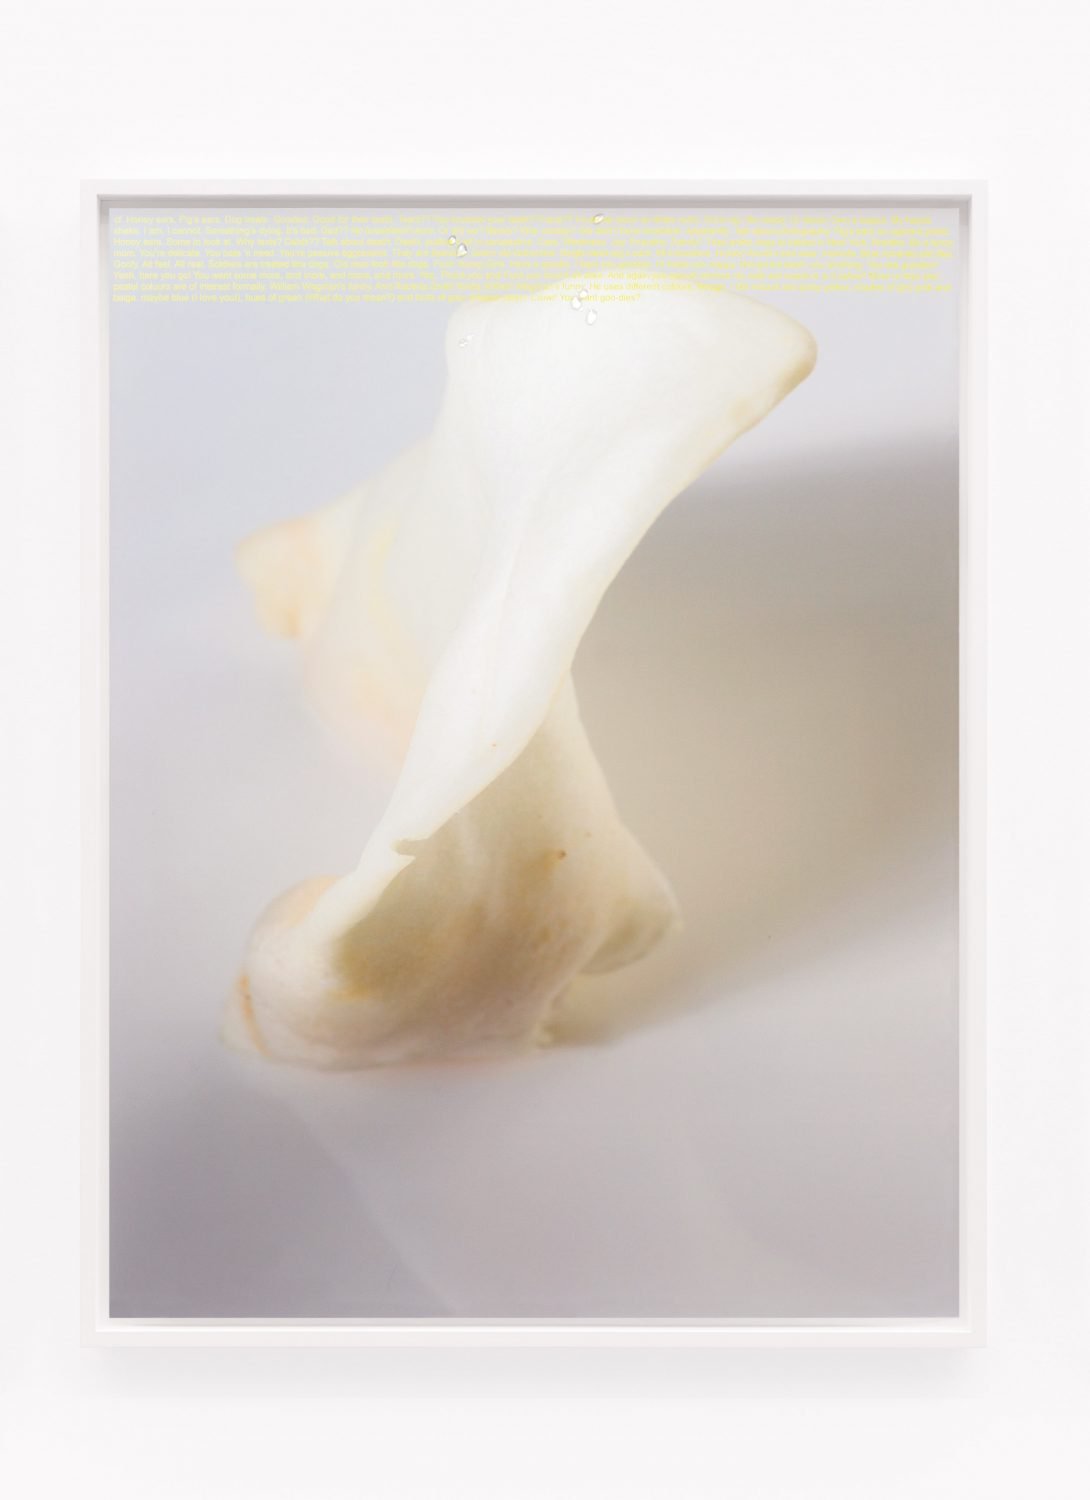 Lisa HolzerInducement, 2016Pigment print on cotton paper, Crystal Clear 202/1 polyurethane on glass92 x 72 cm